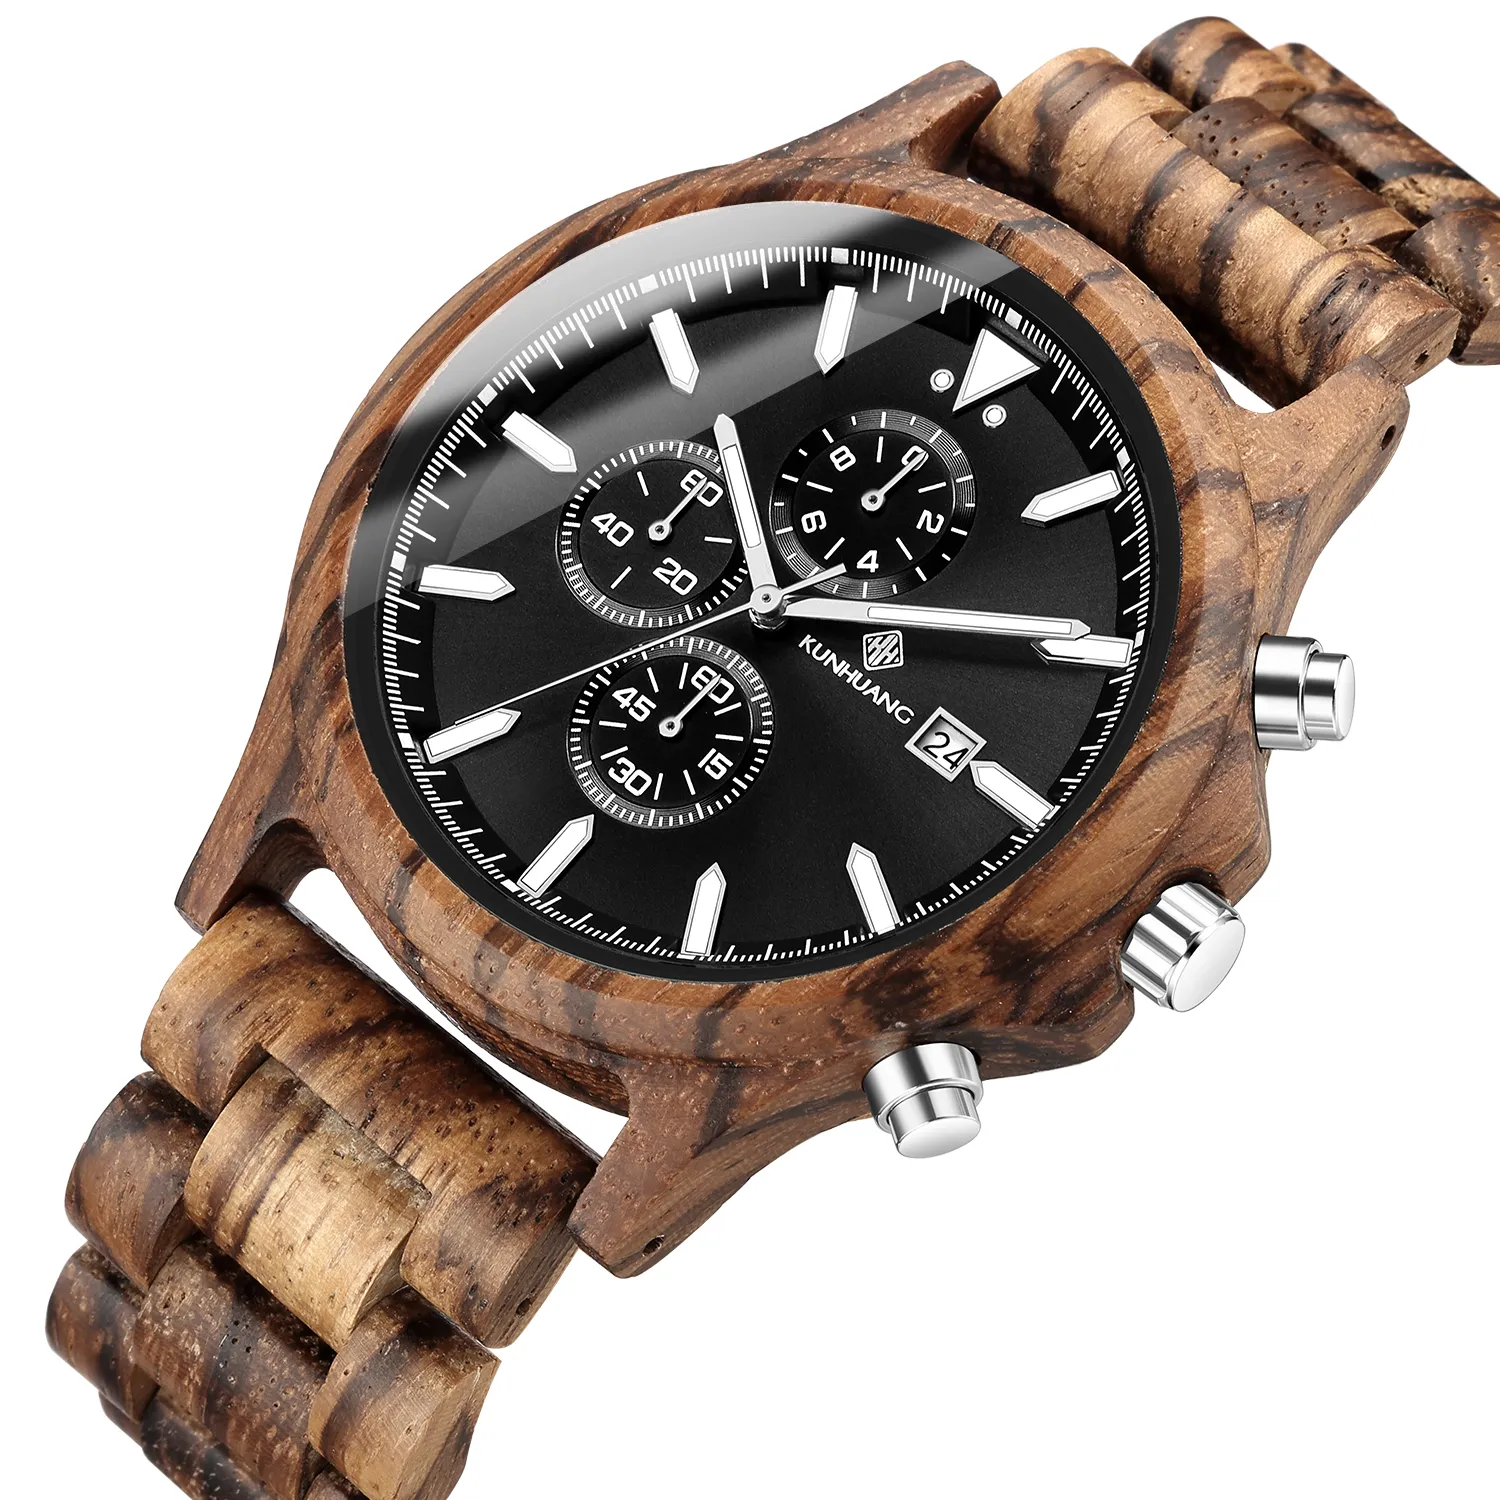 Men Wood Watch Chronograph Luxury Military Sport Watches Stylish Casual Personalized Wooden Quartz Watches344y